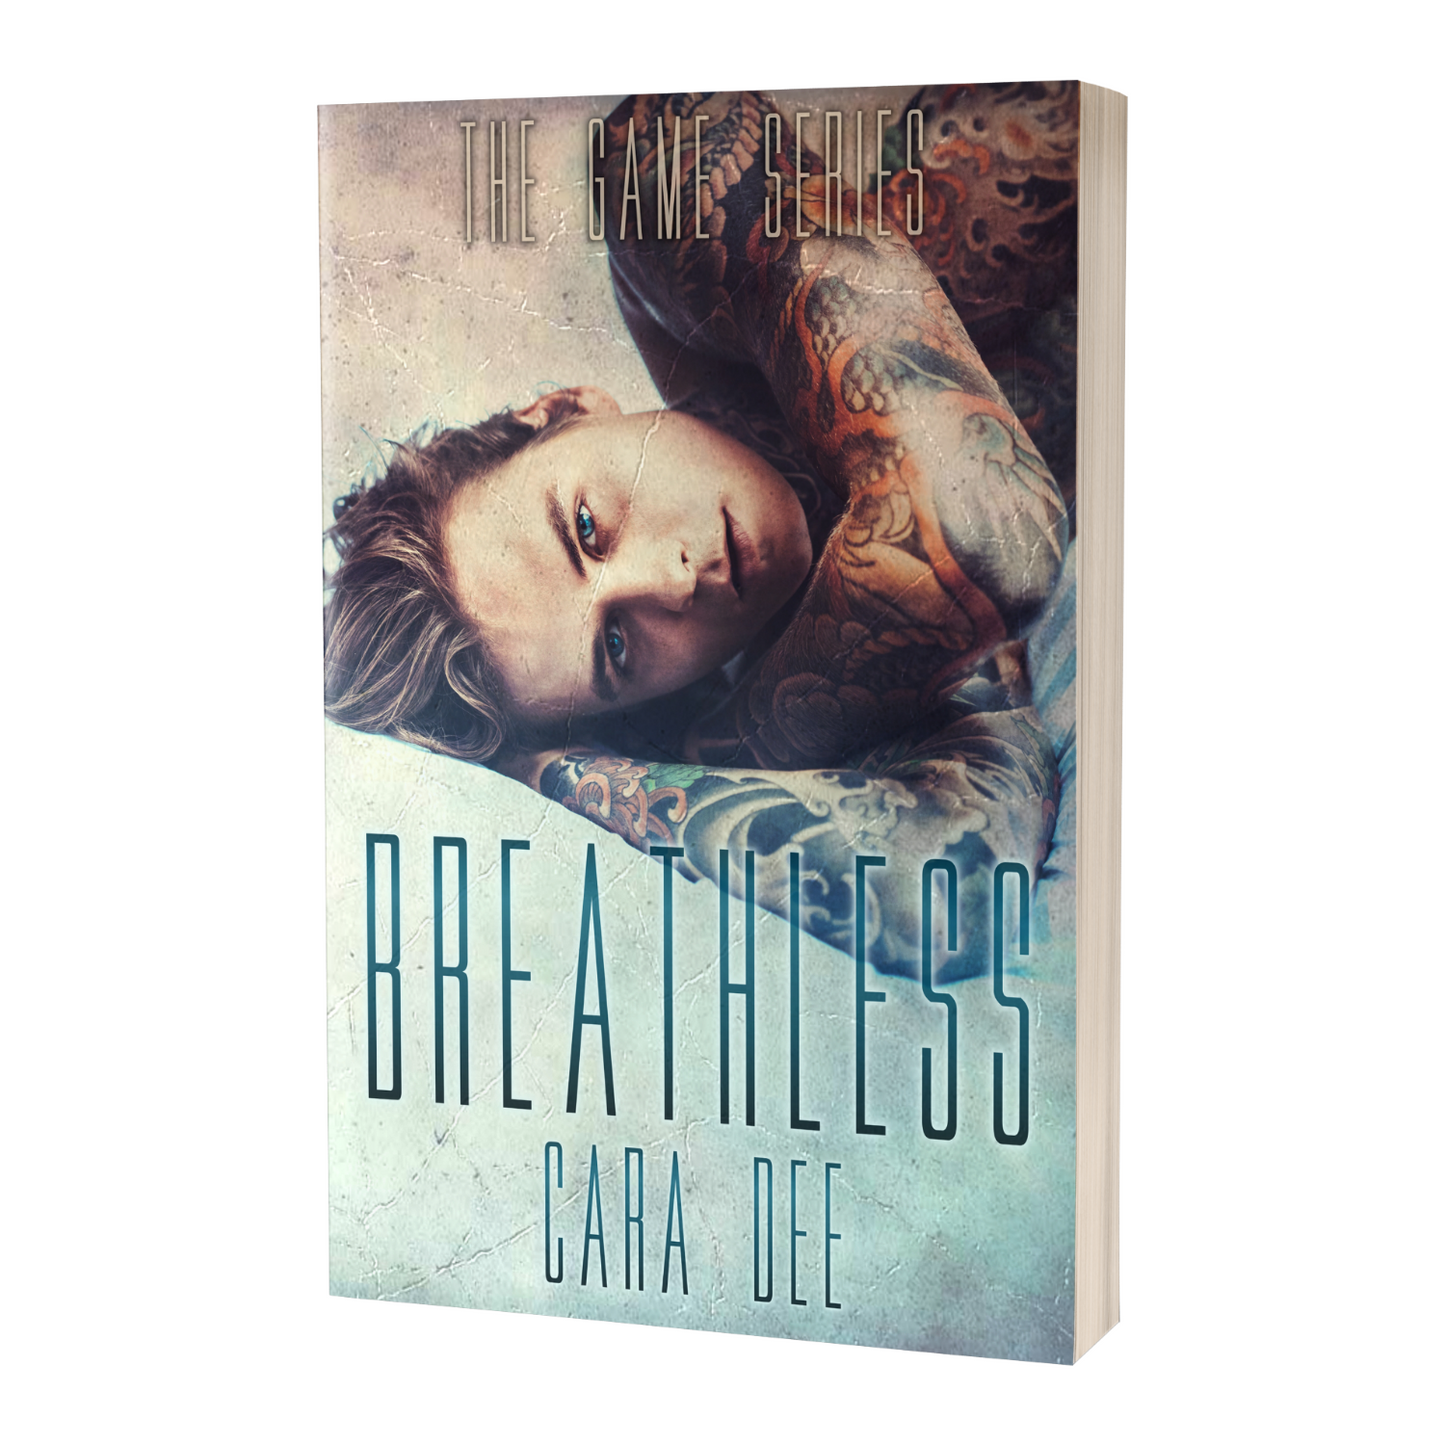 The Game Series, #3 - Breathless